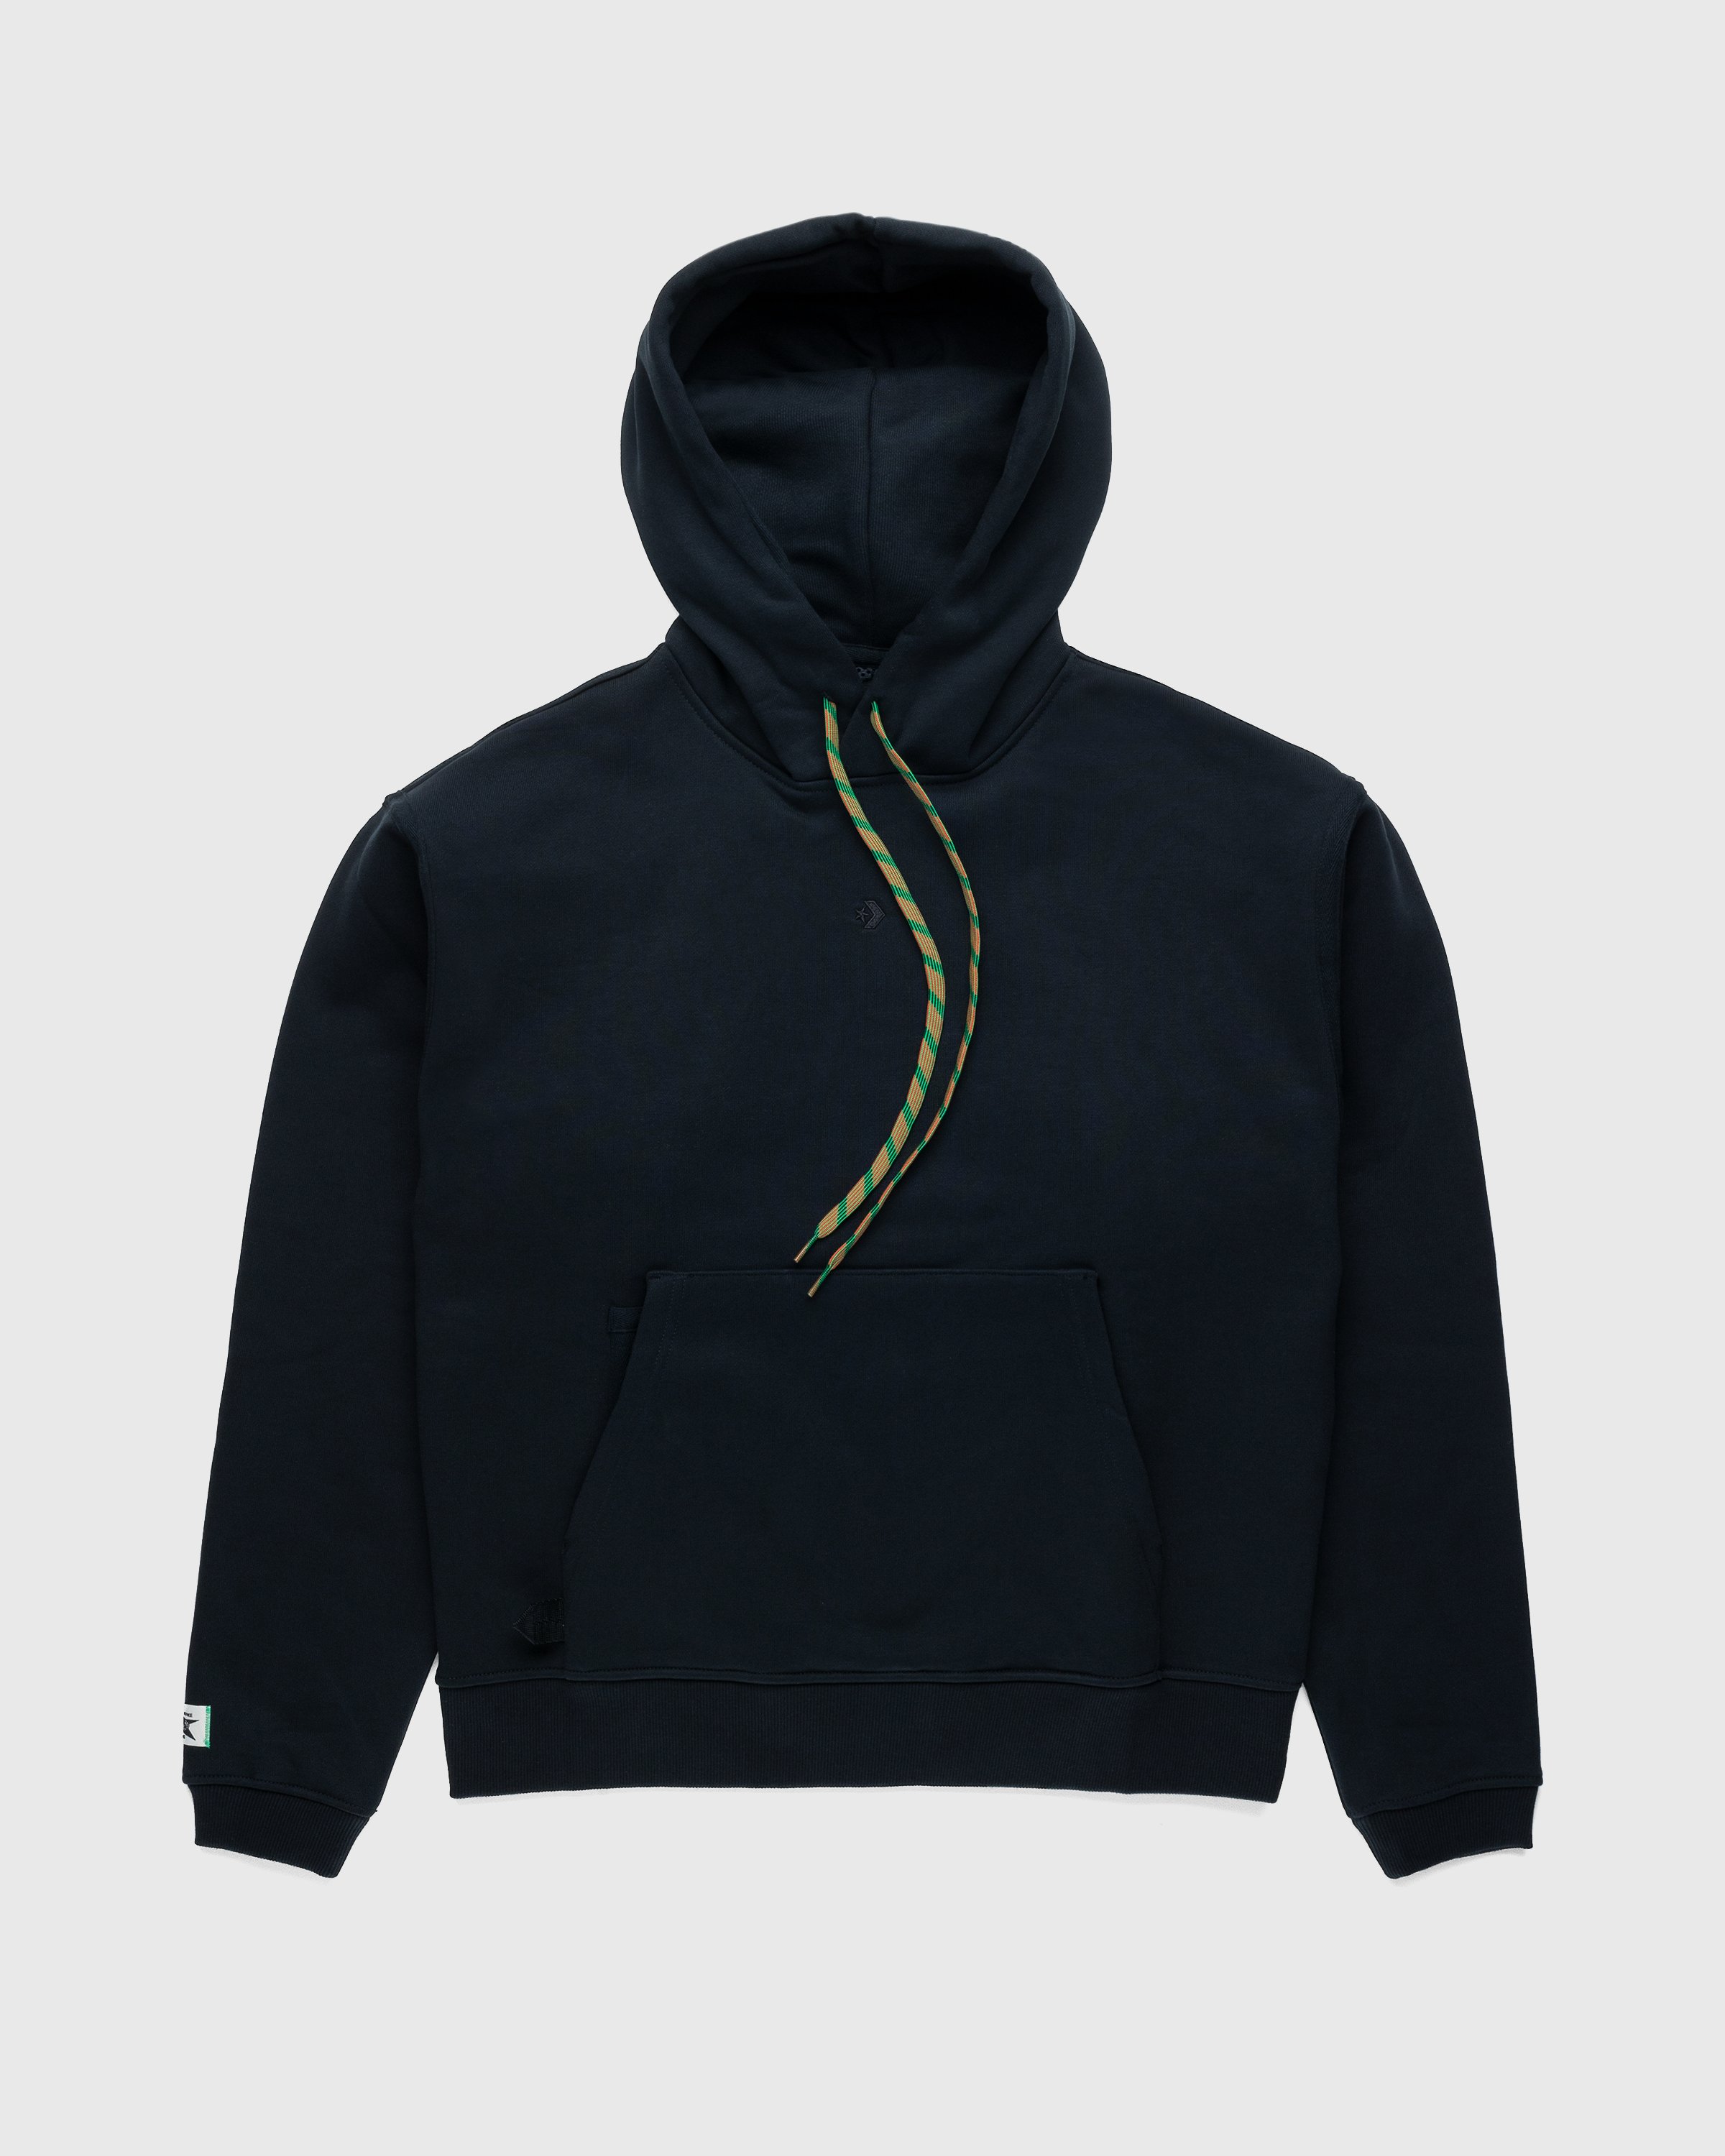 Converse x Barriers - Court Ready Hoodie Black - Clothing - Black - Image 2